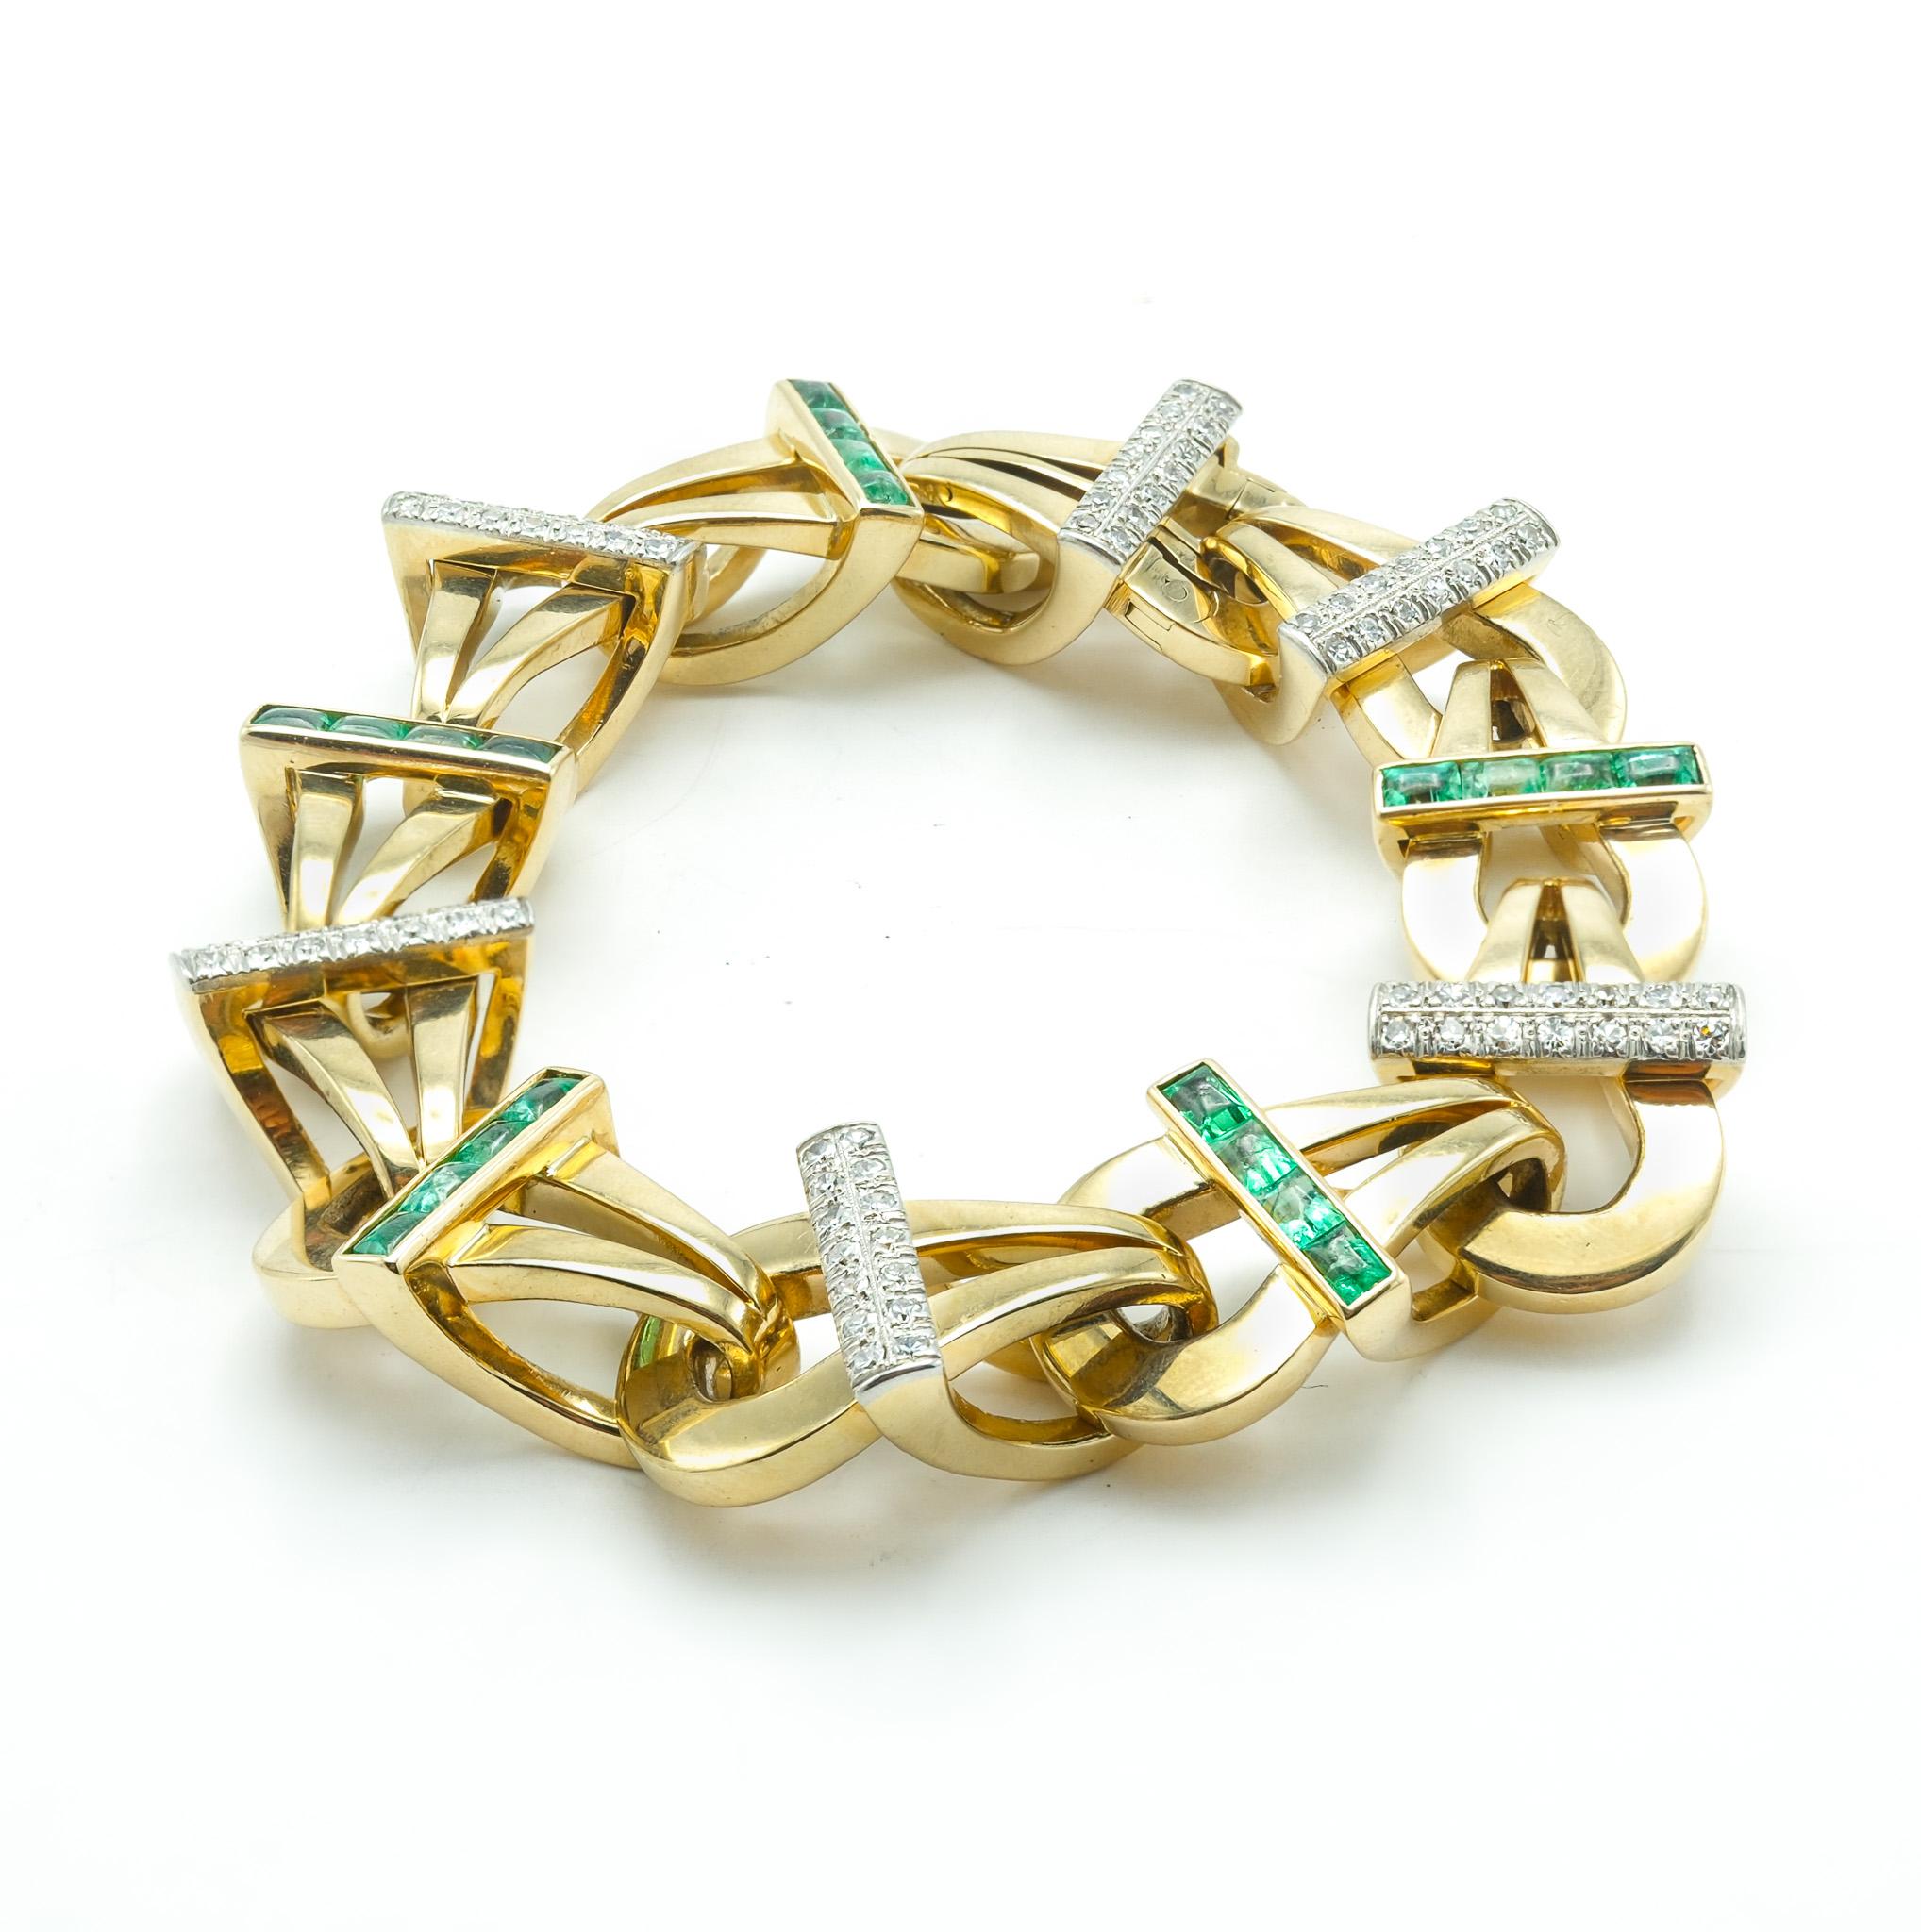 Intricately made with extreme precision - this 14 karat yellow gold fancy link bracelet is a symbol of invite beauty. 

This wearable sculpture is accented with 84 diamonds totaling 1 carat and 20 emeralds totaling 2 carat. What is most special